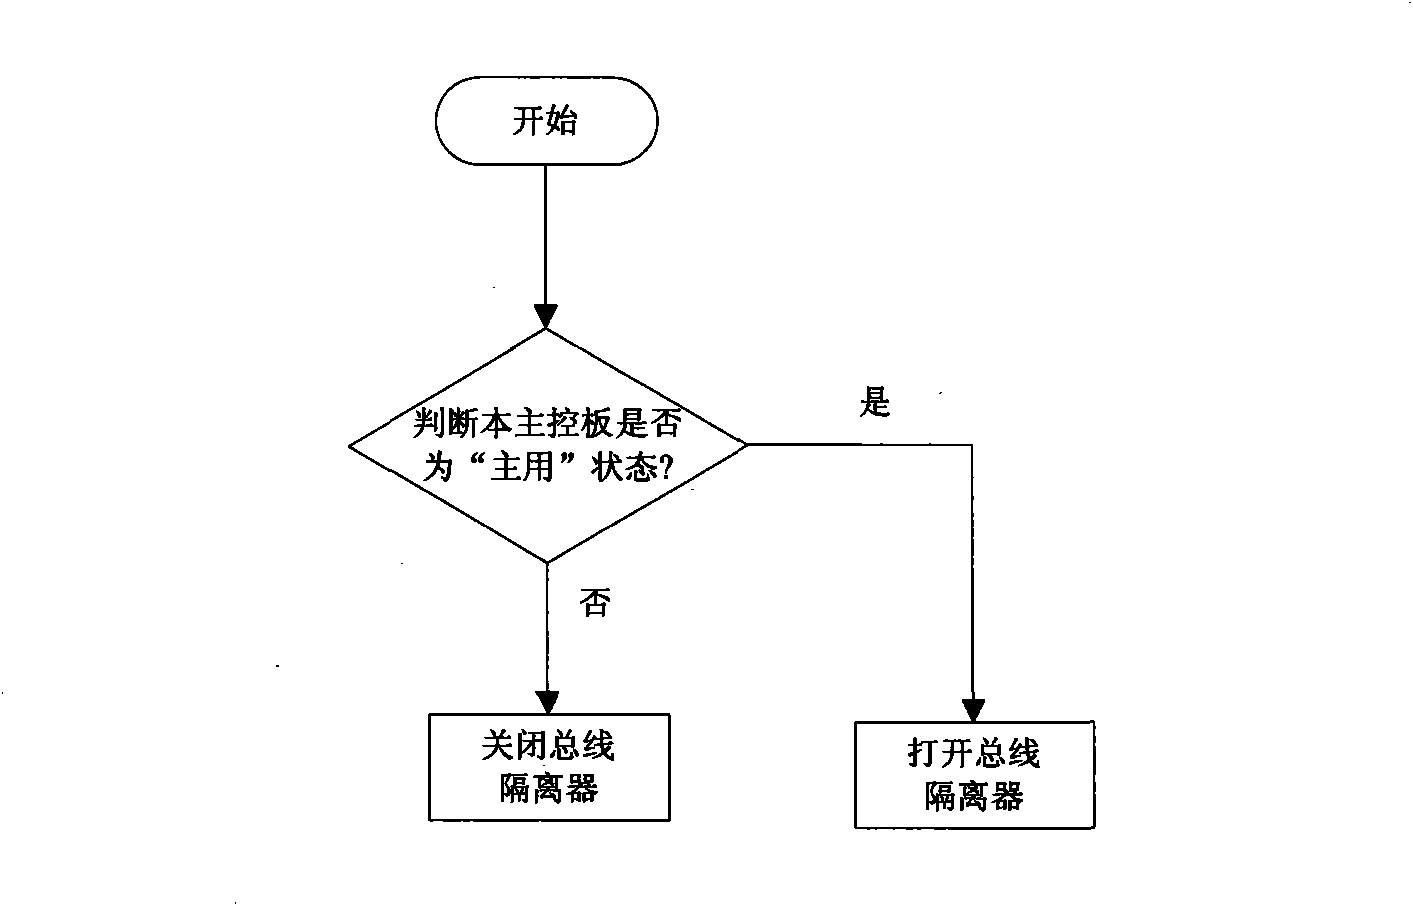 Synchronous data controller based hot standby system of main control unit and method thereof